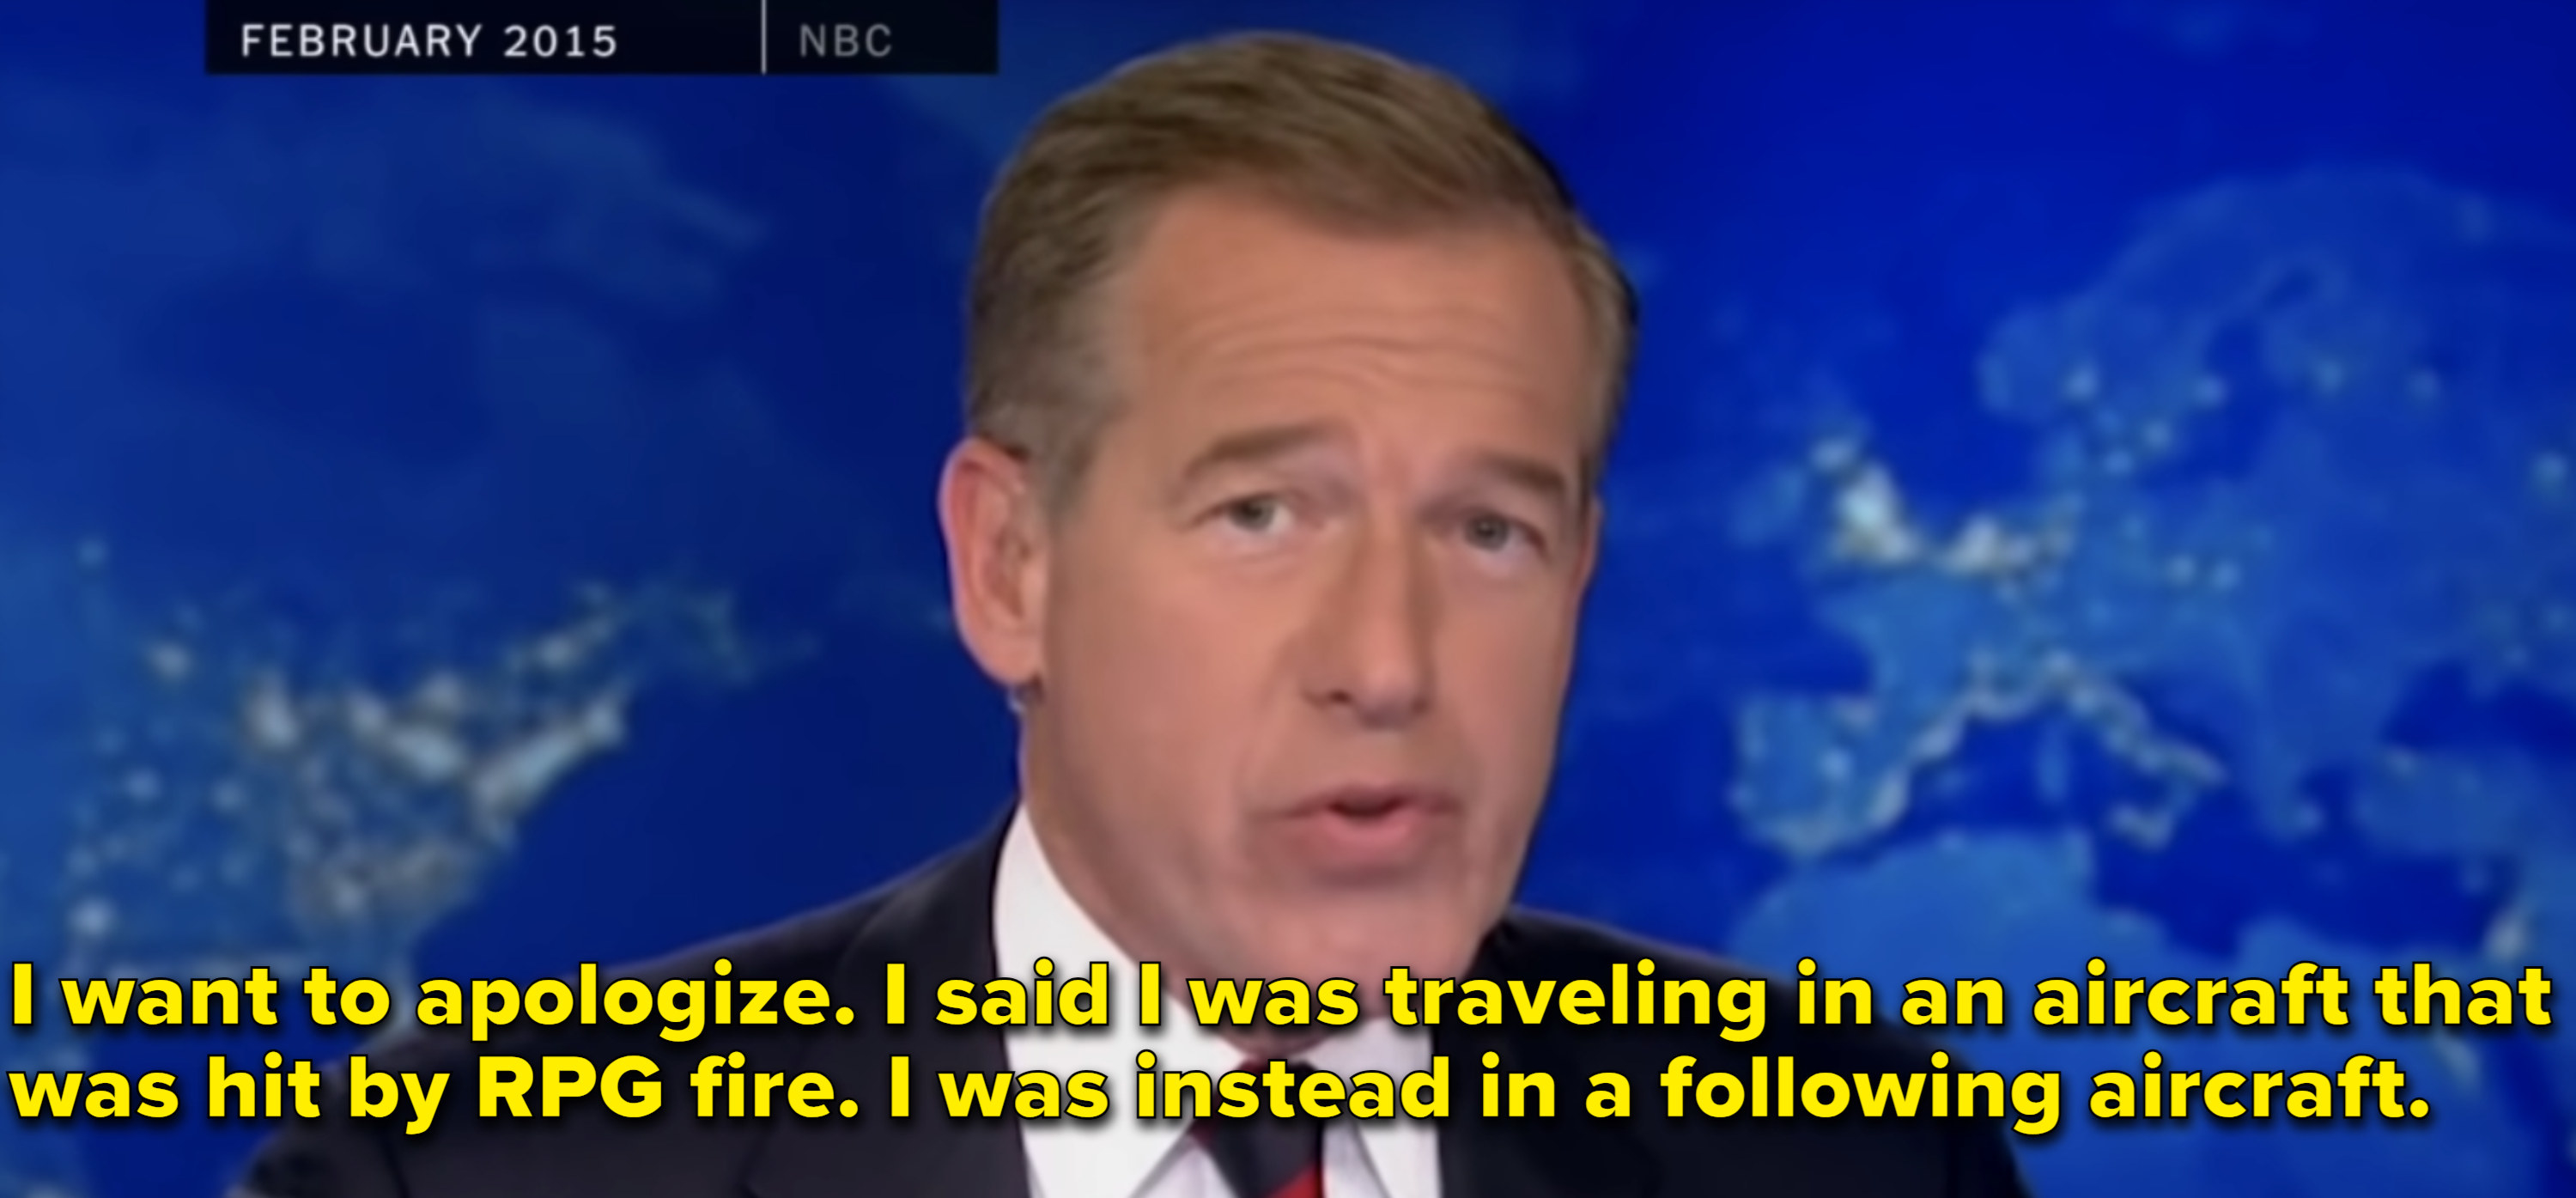 &quot;I want to apologize. I said I was traveling in an aircraft that was hit by RPG fire. I was instead in a following aircraft.&quot;